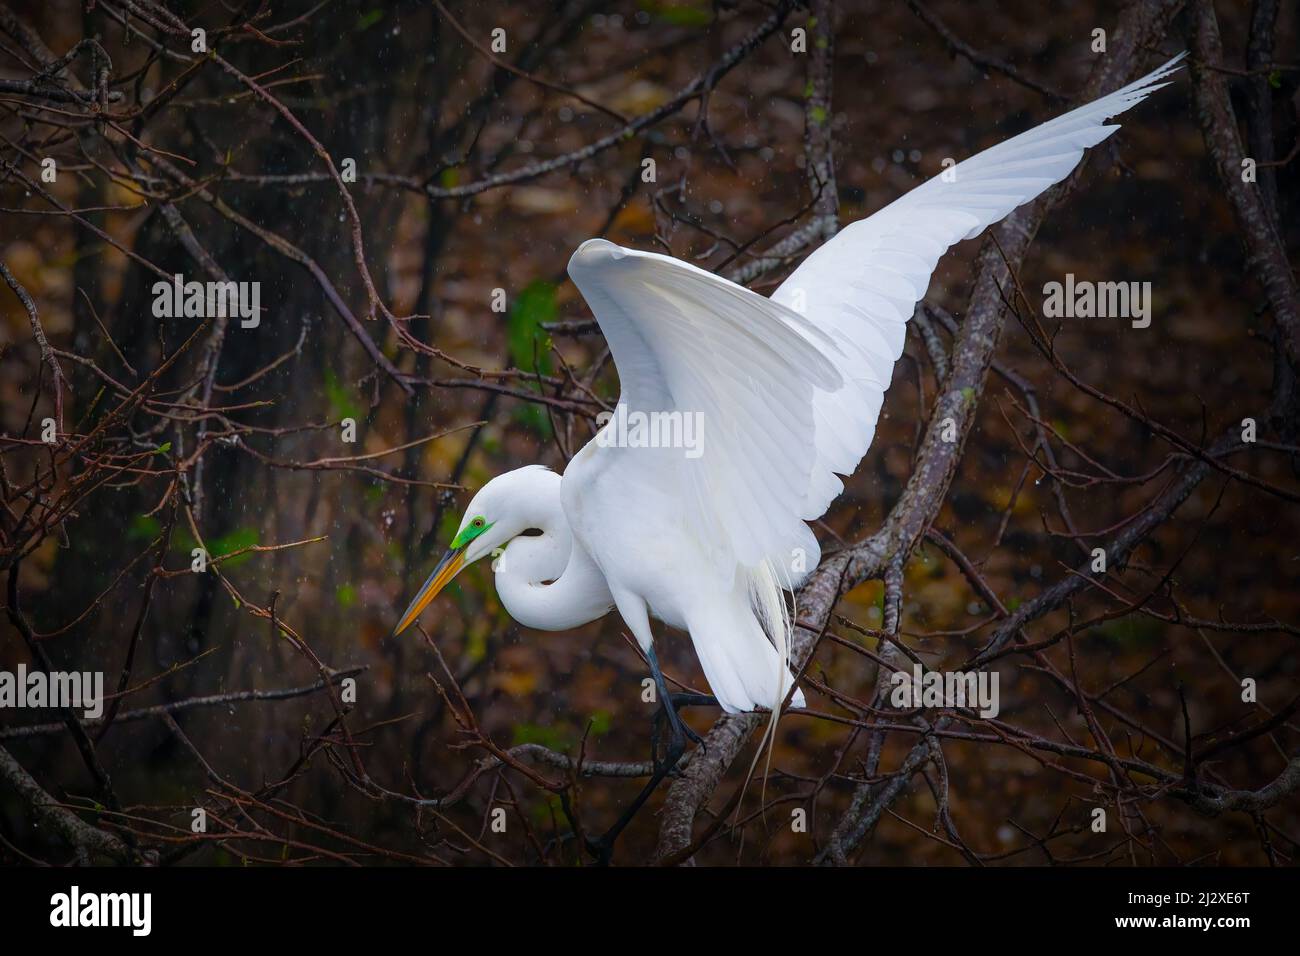 A great white egret looks for nest building materials in Everglades National Park. Stock Photo